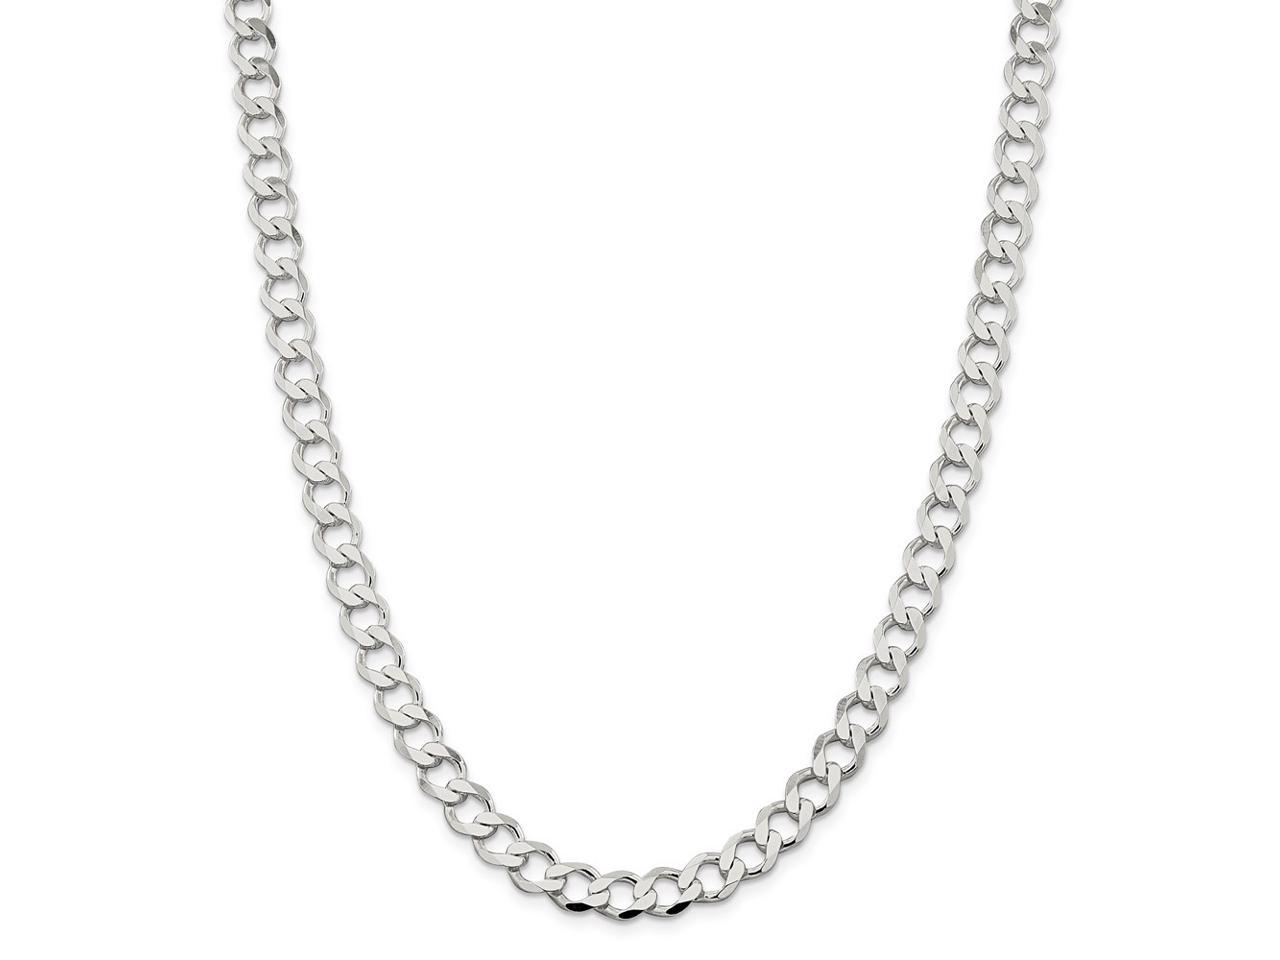 Solid 925 Sterling Silver 6.1mm Fancy Rolo Chain Necklace with Secure Lobster Lock Clasp 